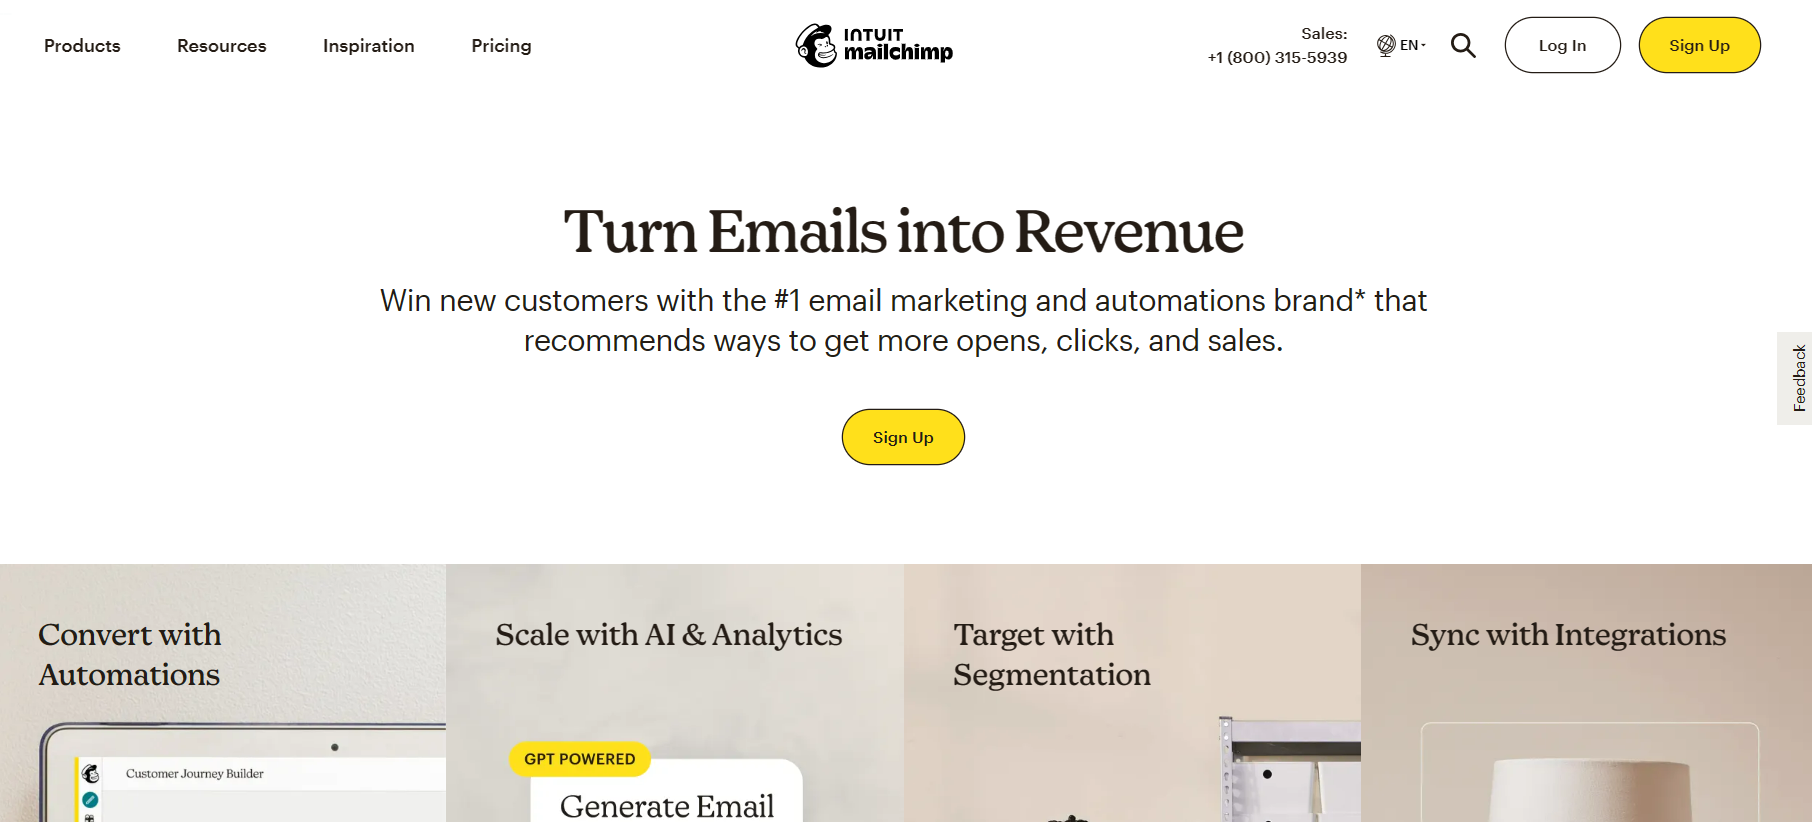 Mailchimp Features: Exploring the Key Capabilities and Benefits of the Email Marketing Platform